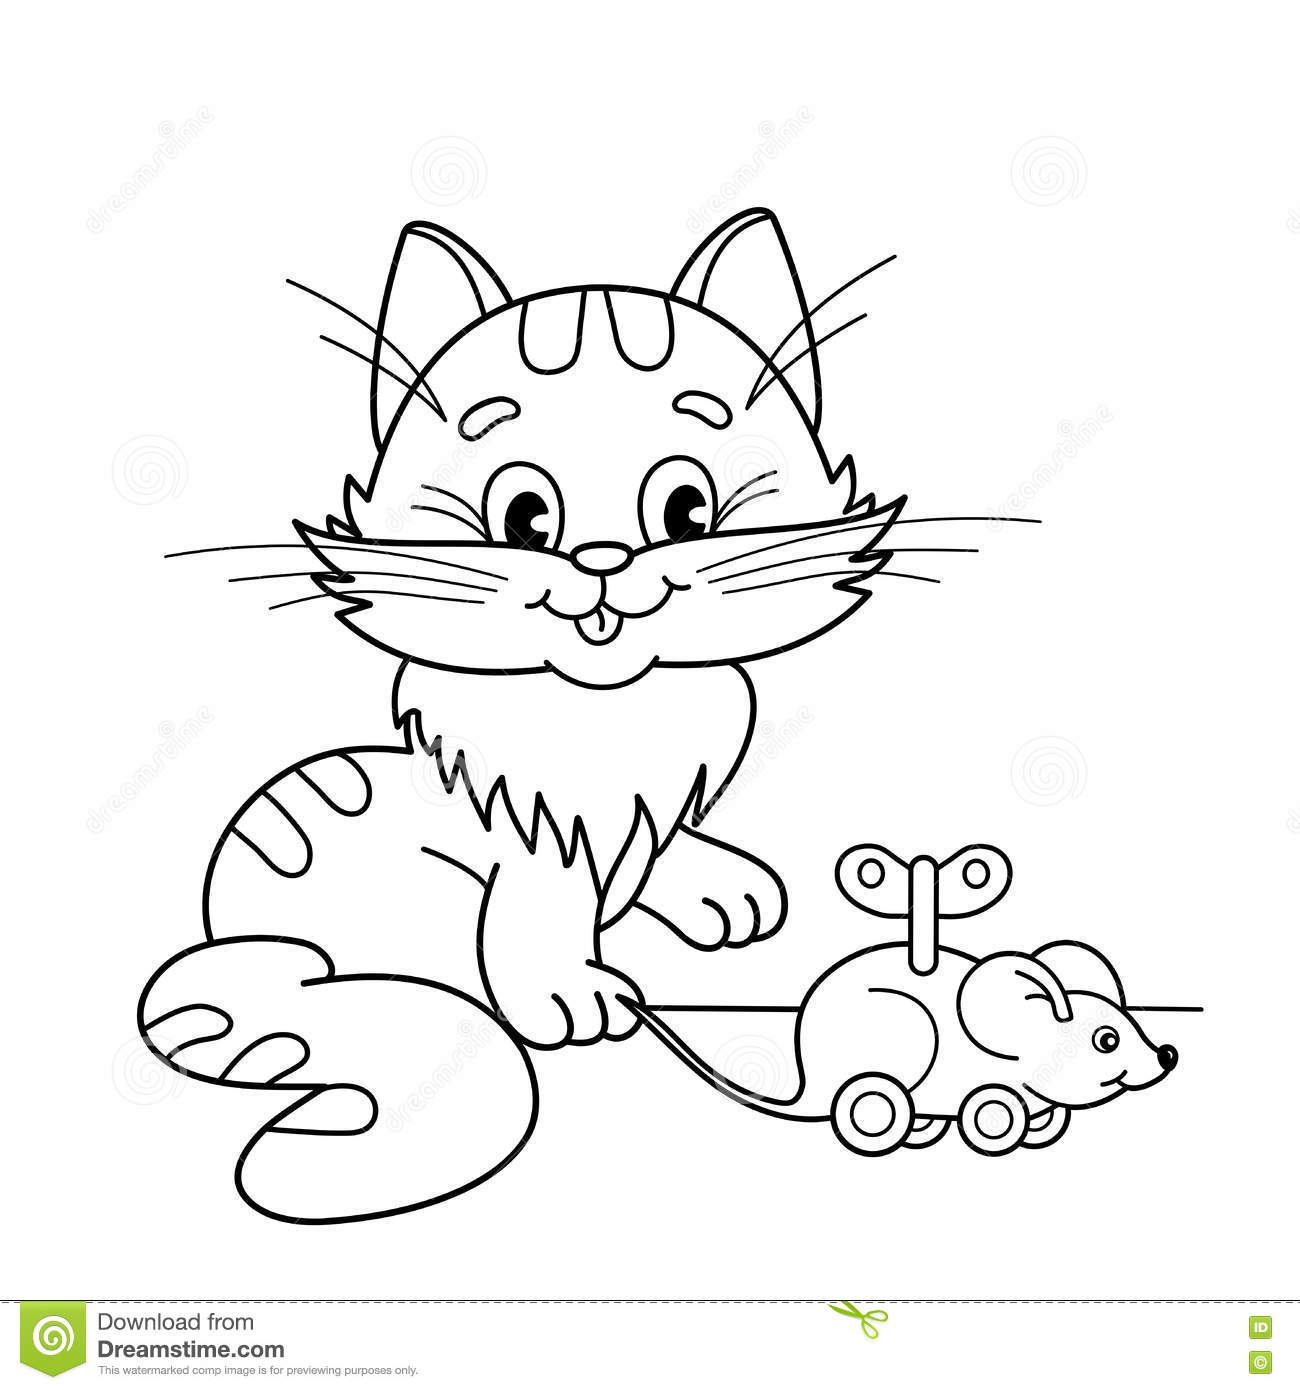 mice-coloring-pages-at-getdrawings-free-download